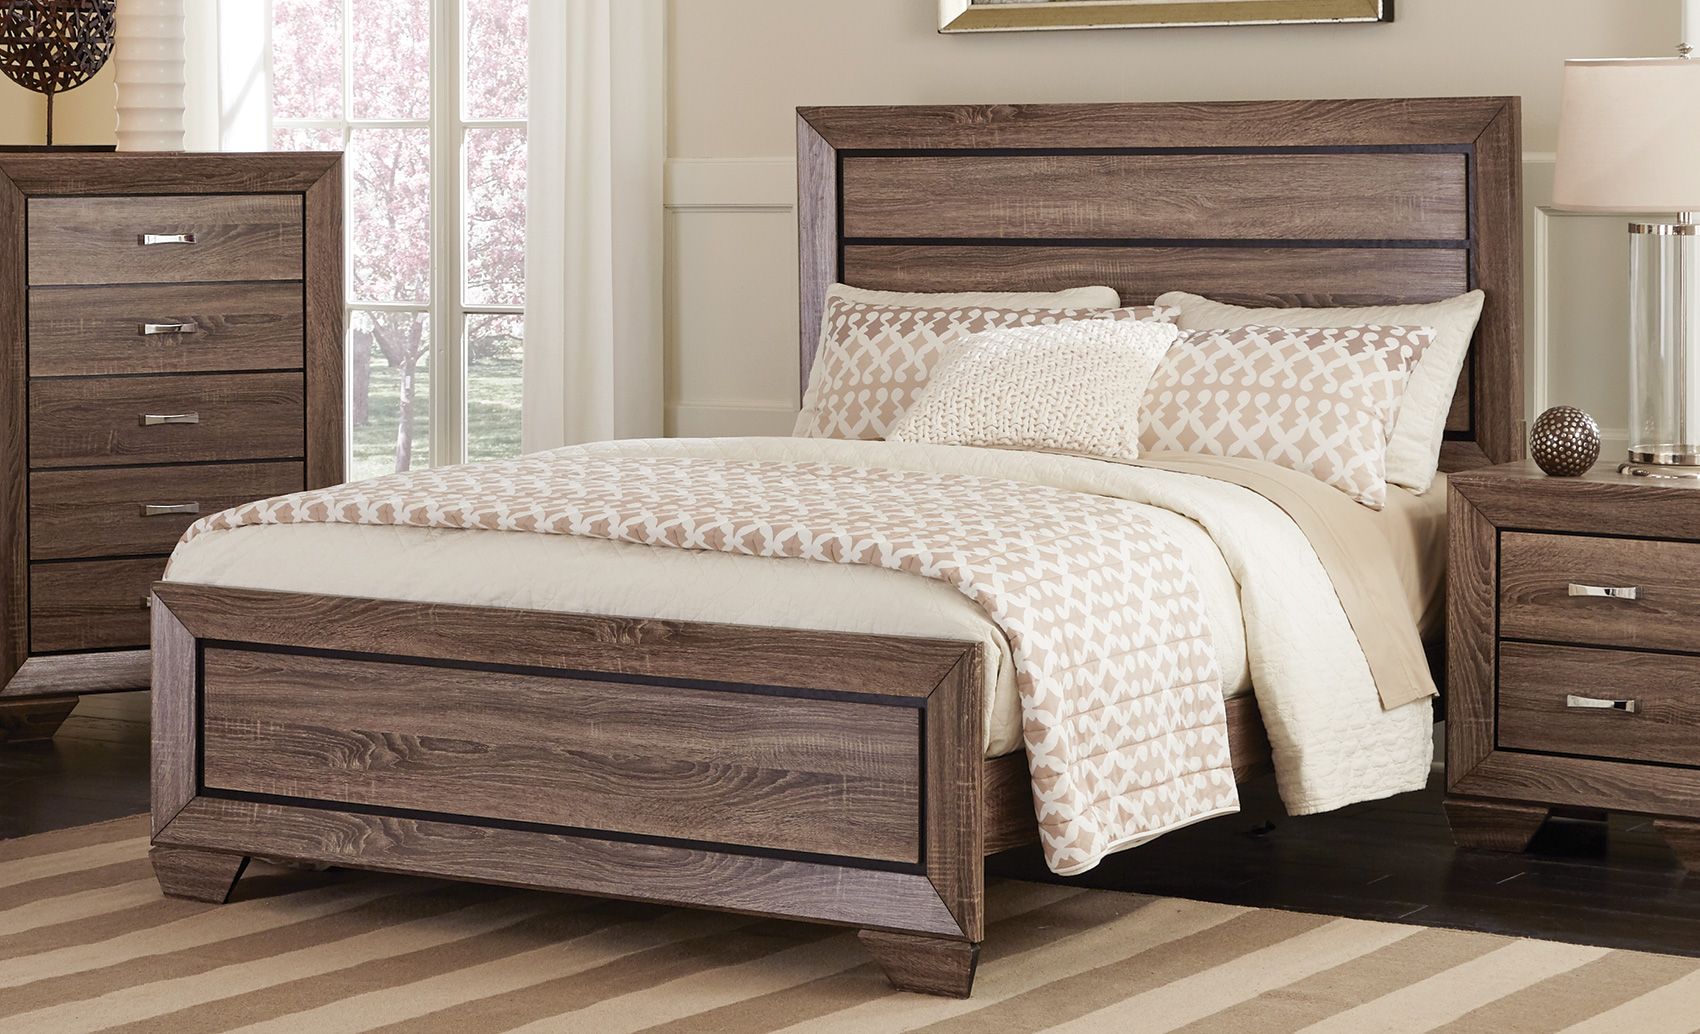 Quinden King Poster Bed 1stopbedrooms, Quinden King Poster Bed Reviews